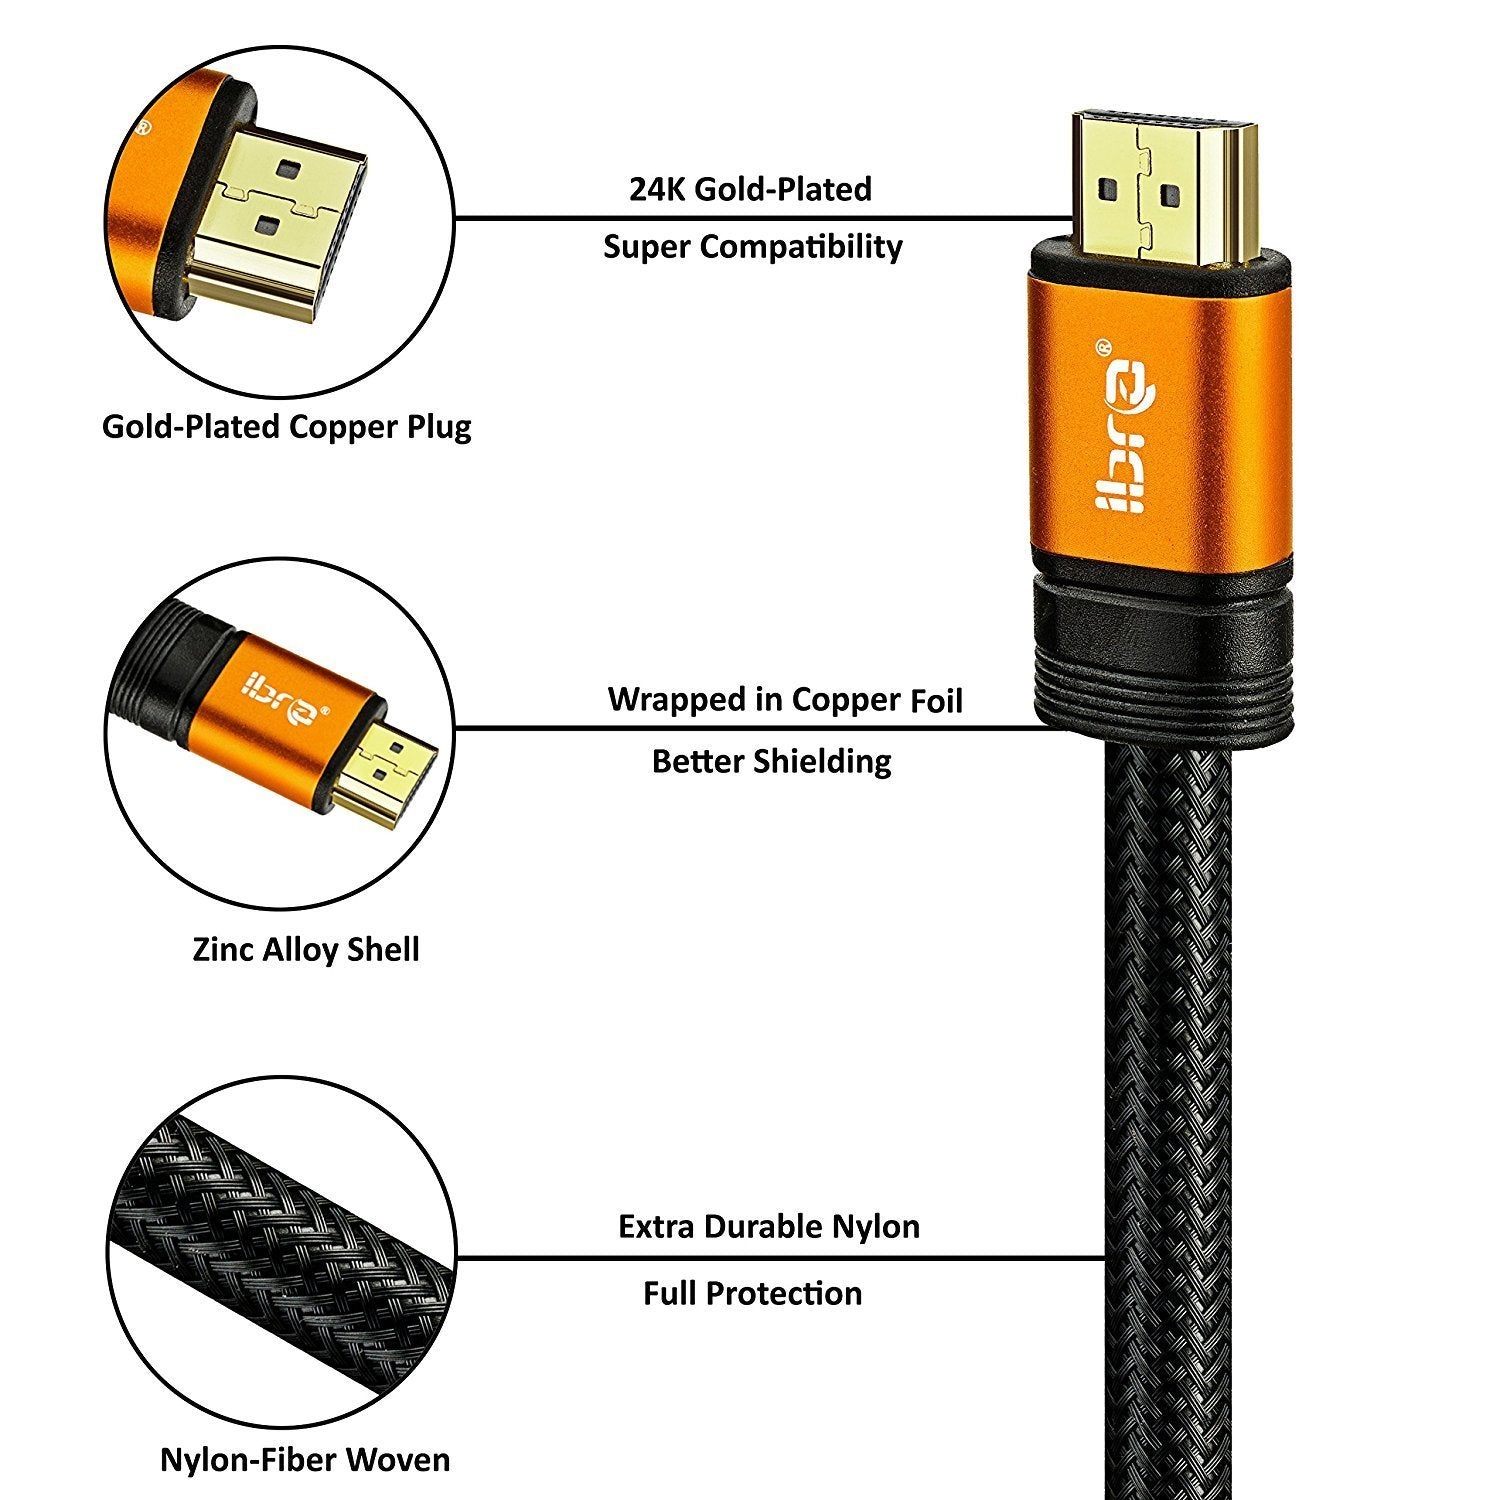 IBRA Orange HDMI Cable 1M - UHD HDMI 2.0 (4K@60Hz) Ready -18Gbps-28AWG Braided Cord -Gold Plated Connectors -Ethernet,Audio Return-Video 4K 2160p,HD 1080p,3D -Xbox PlayStation PS3 PS4 PC Apple TV